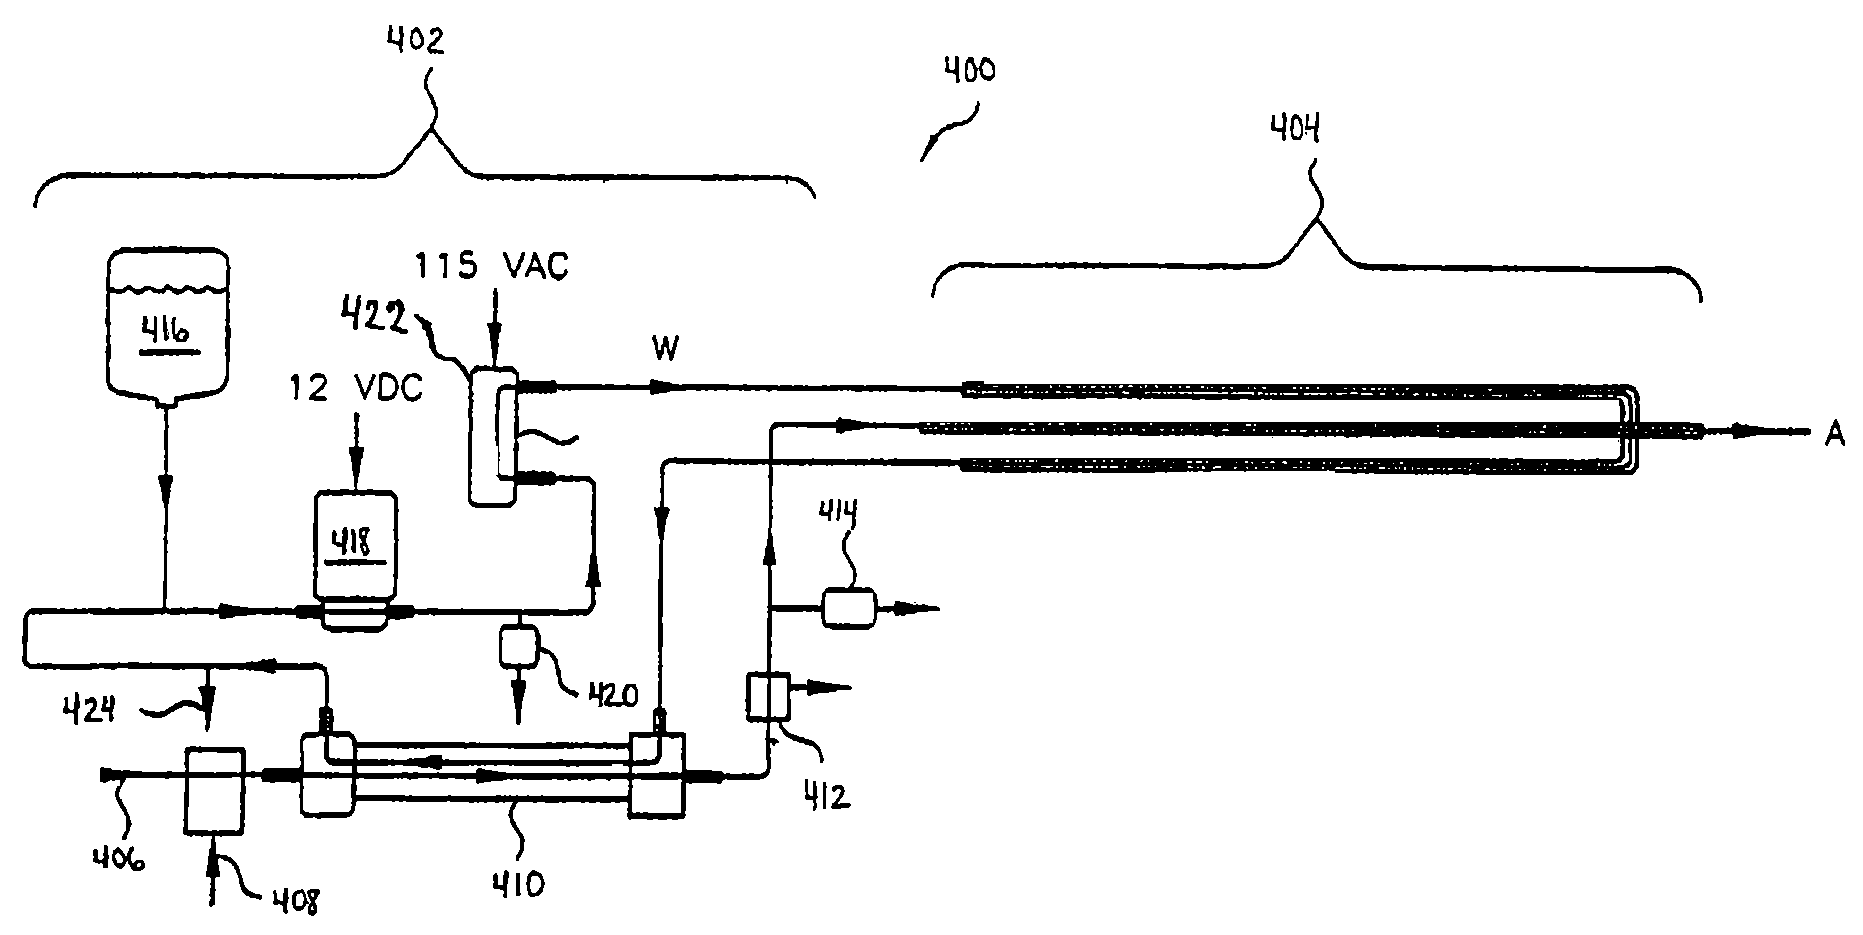 Apparatus and method for delivering water vapor to a gas